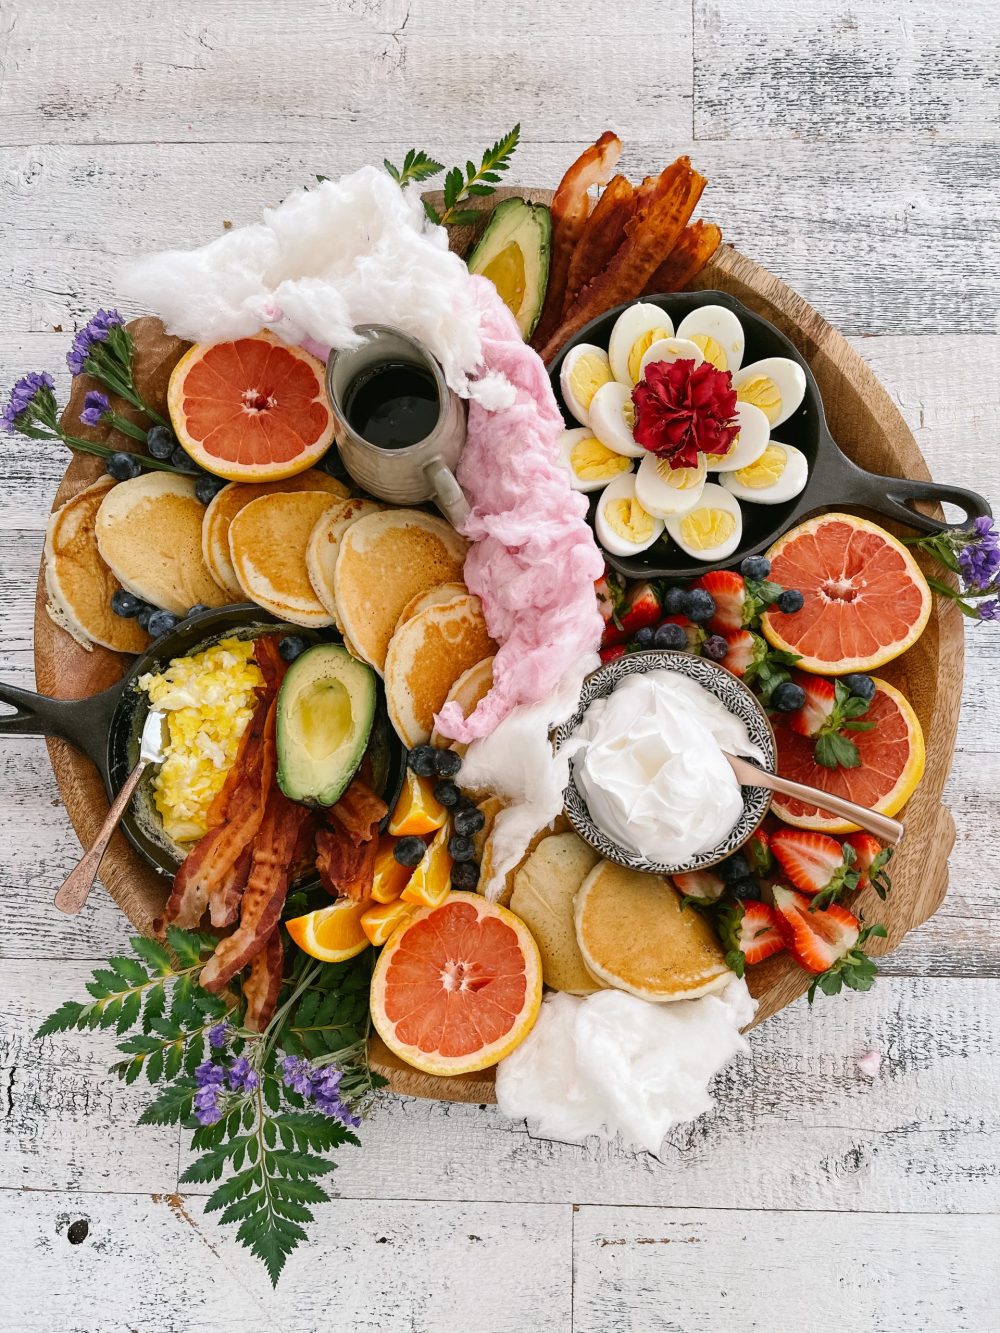 How to Make a Pancake Board That Looks as Delicious as It Tastes. The best Spring Breakfast Board |Pancake Board by popular Florida lifestyle blog, Fresh Mommy Blog: image of a pancake board with pancakes, grapefruit, blueberries, avocado, deviled eggs, bacon, scrambled eggs, and strawberries.